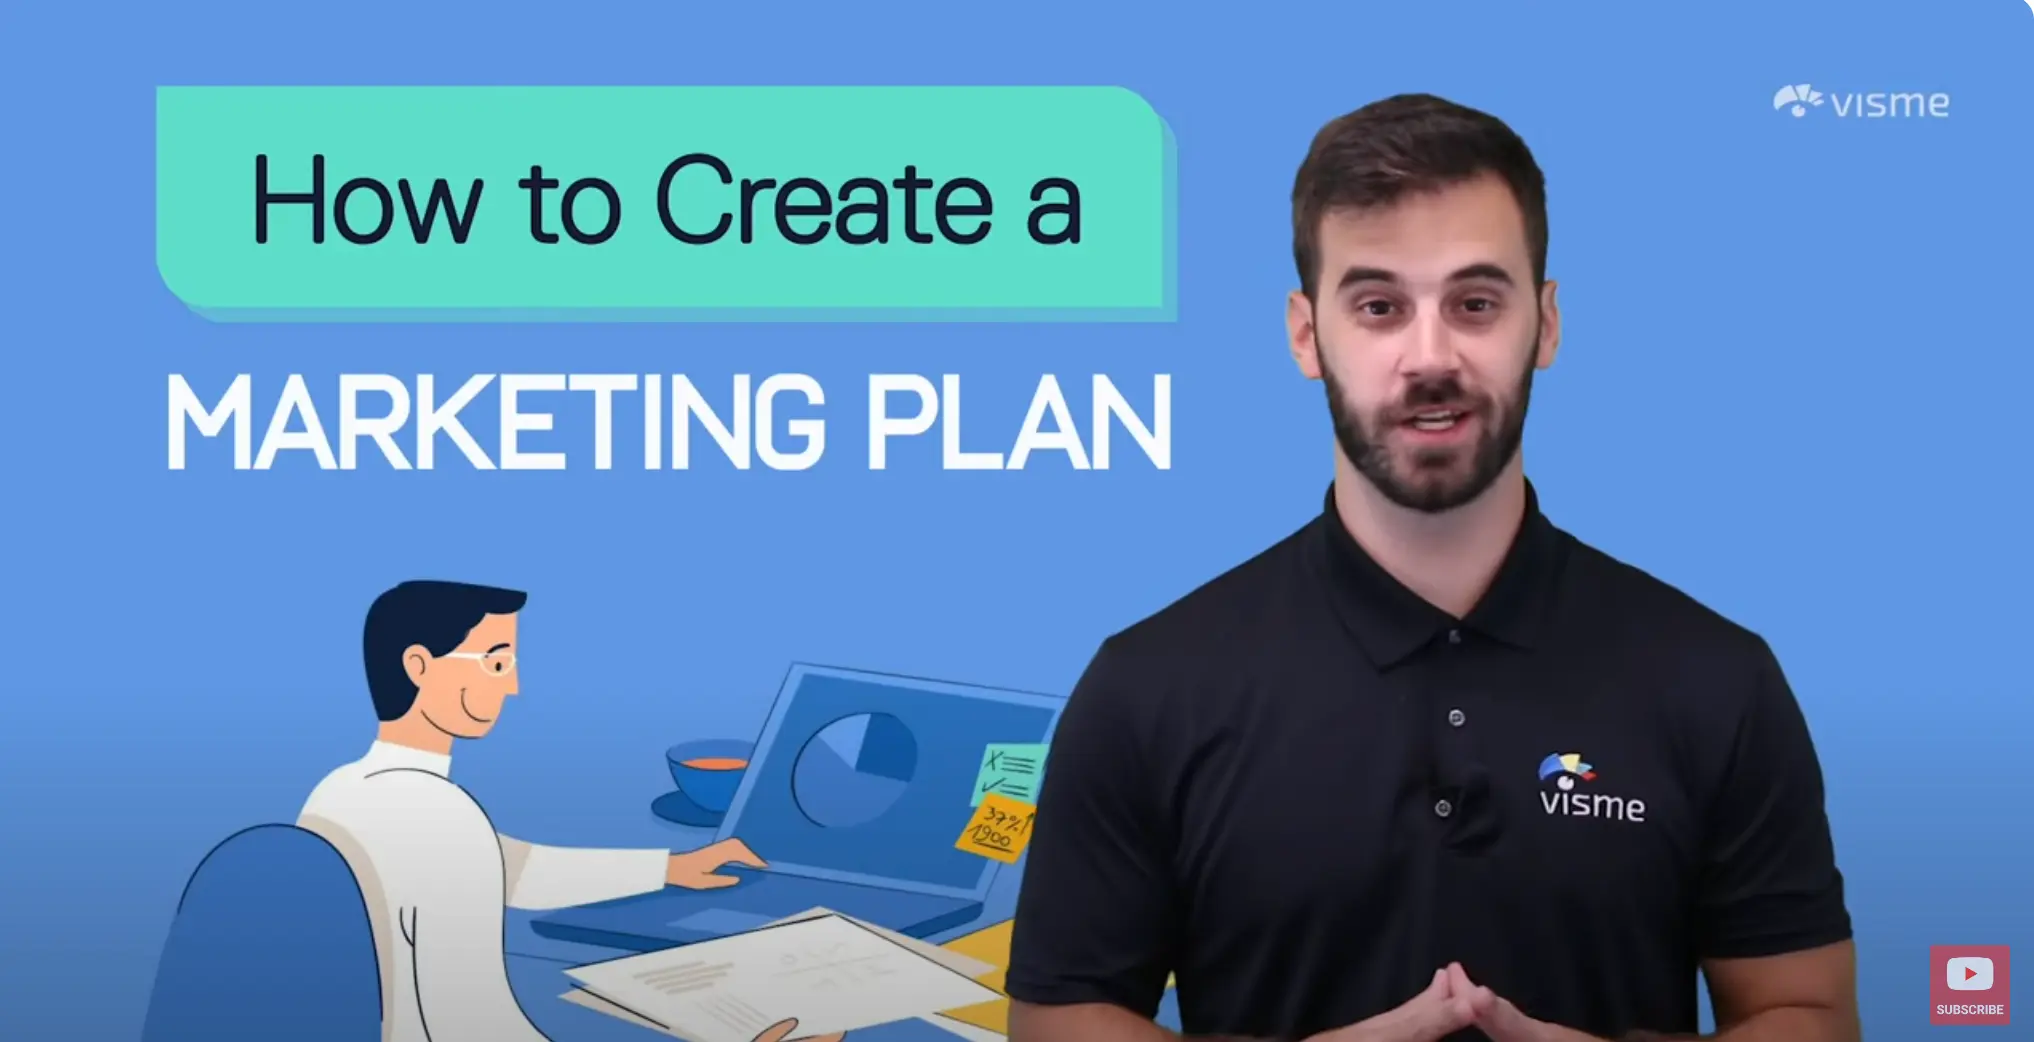 how to create a marketing plan video tutorial